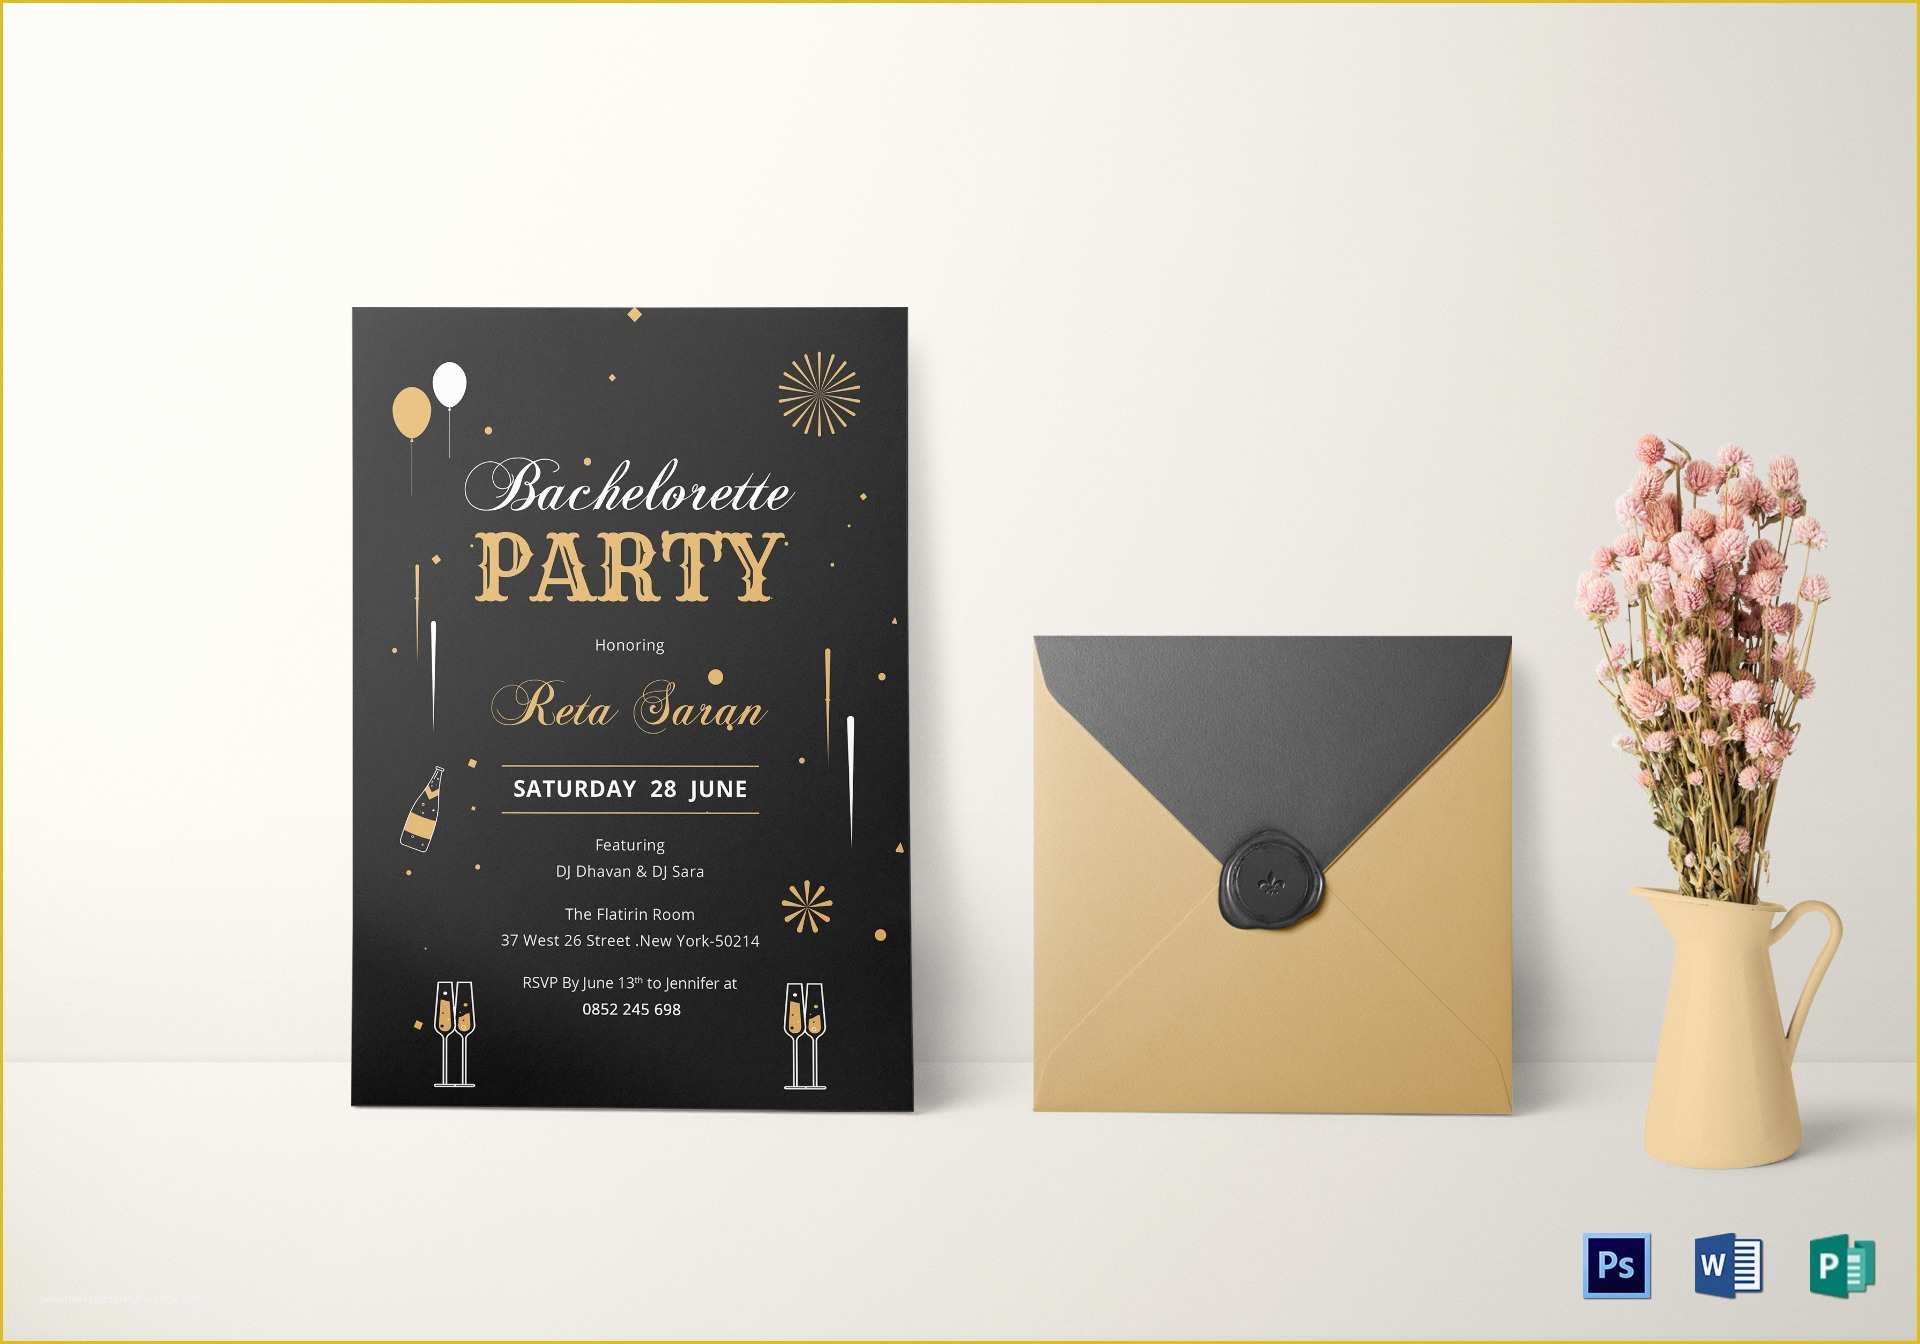 Bachelorette Party Invitation Templates Free Download Of Bachelorette Party Invitation Card Design Template In Word